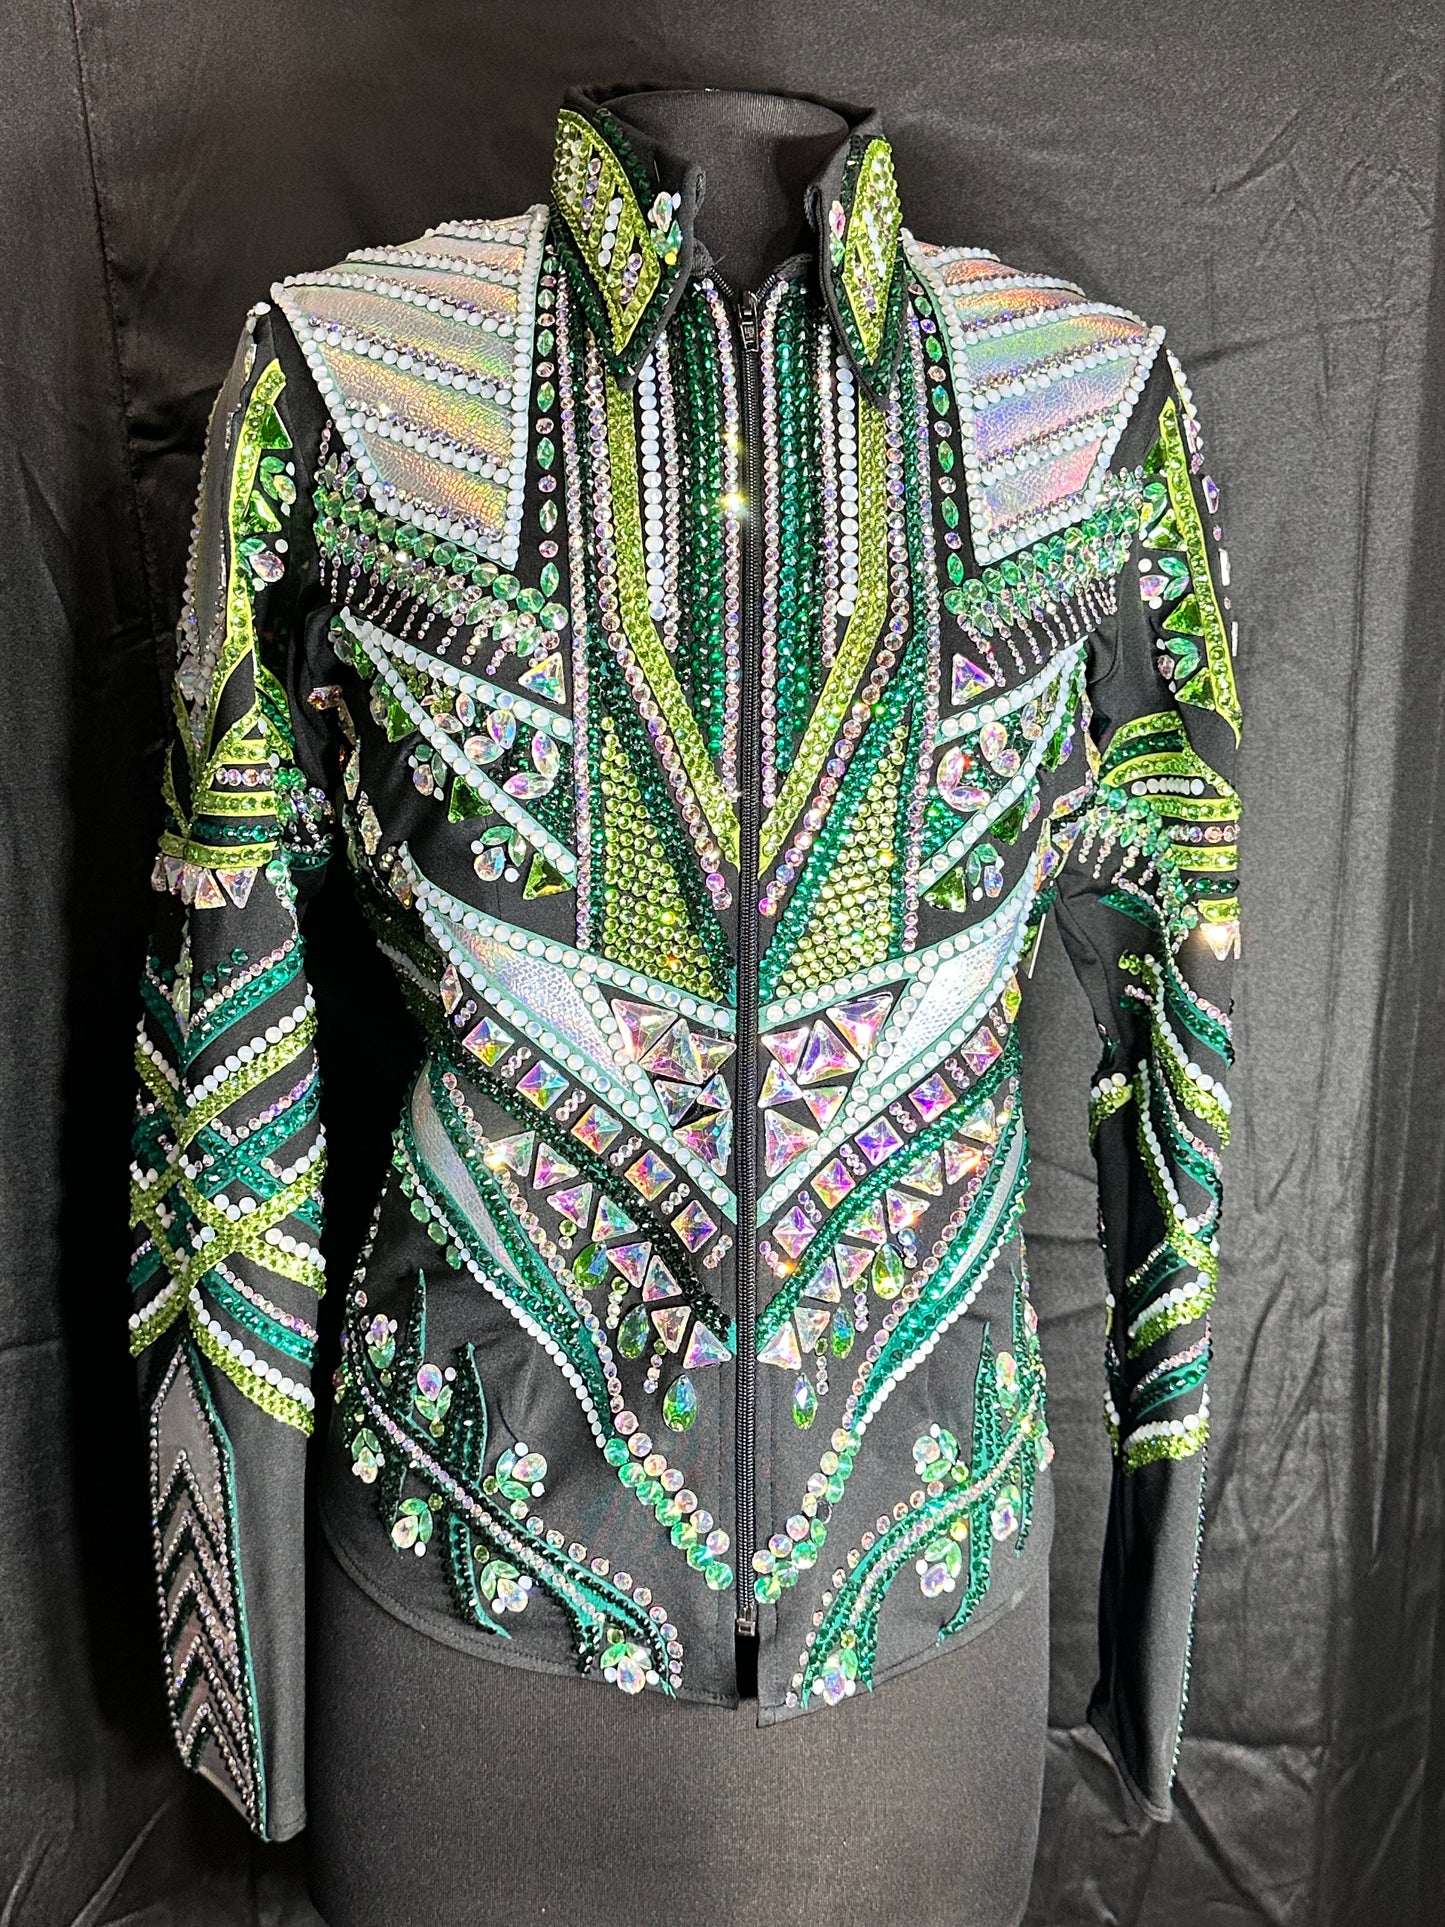 Size Large showmanship jacket black and different shades of green!